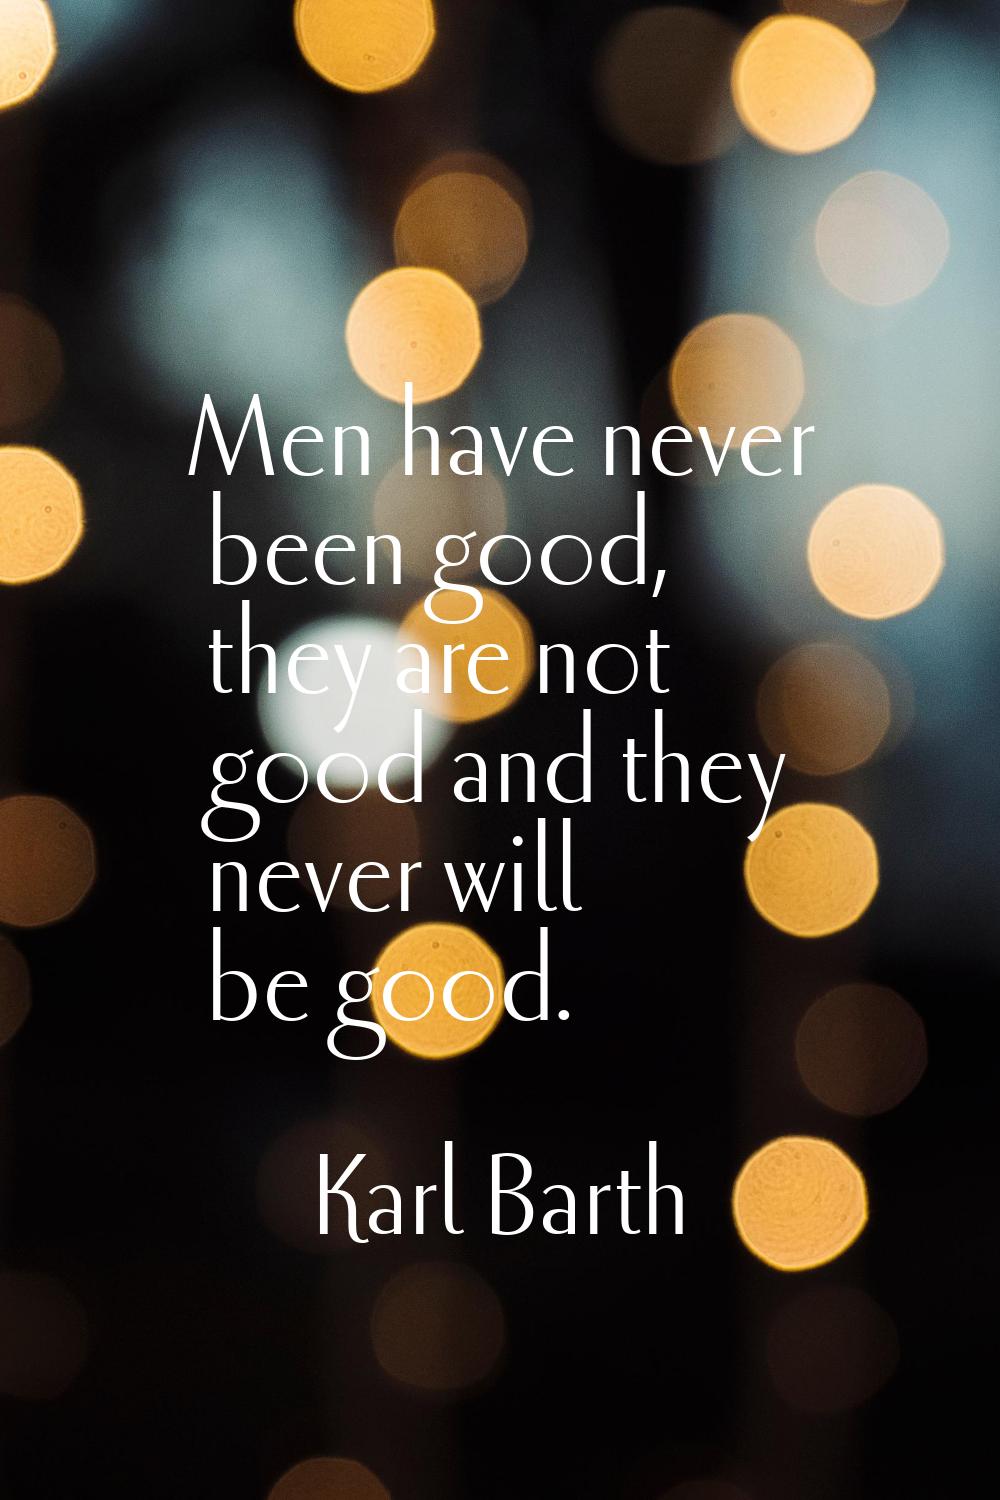 Men have never been good, they are not good and they never will be good.